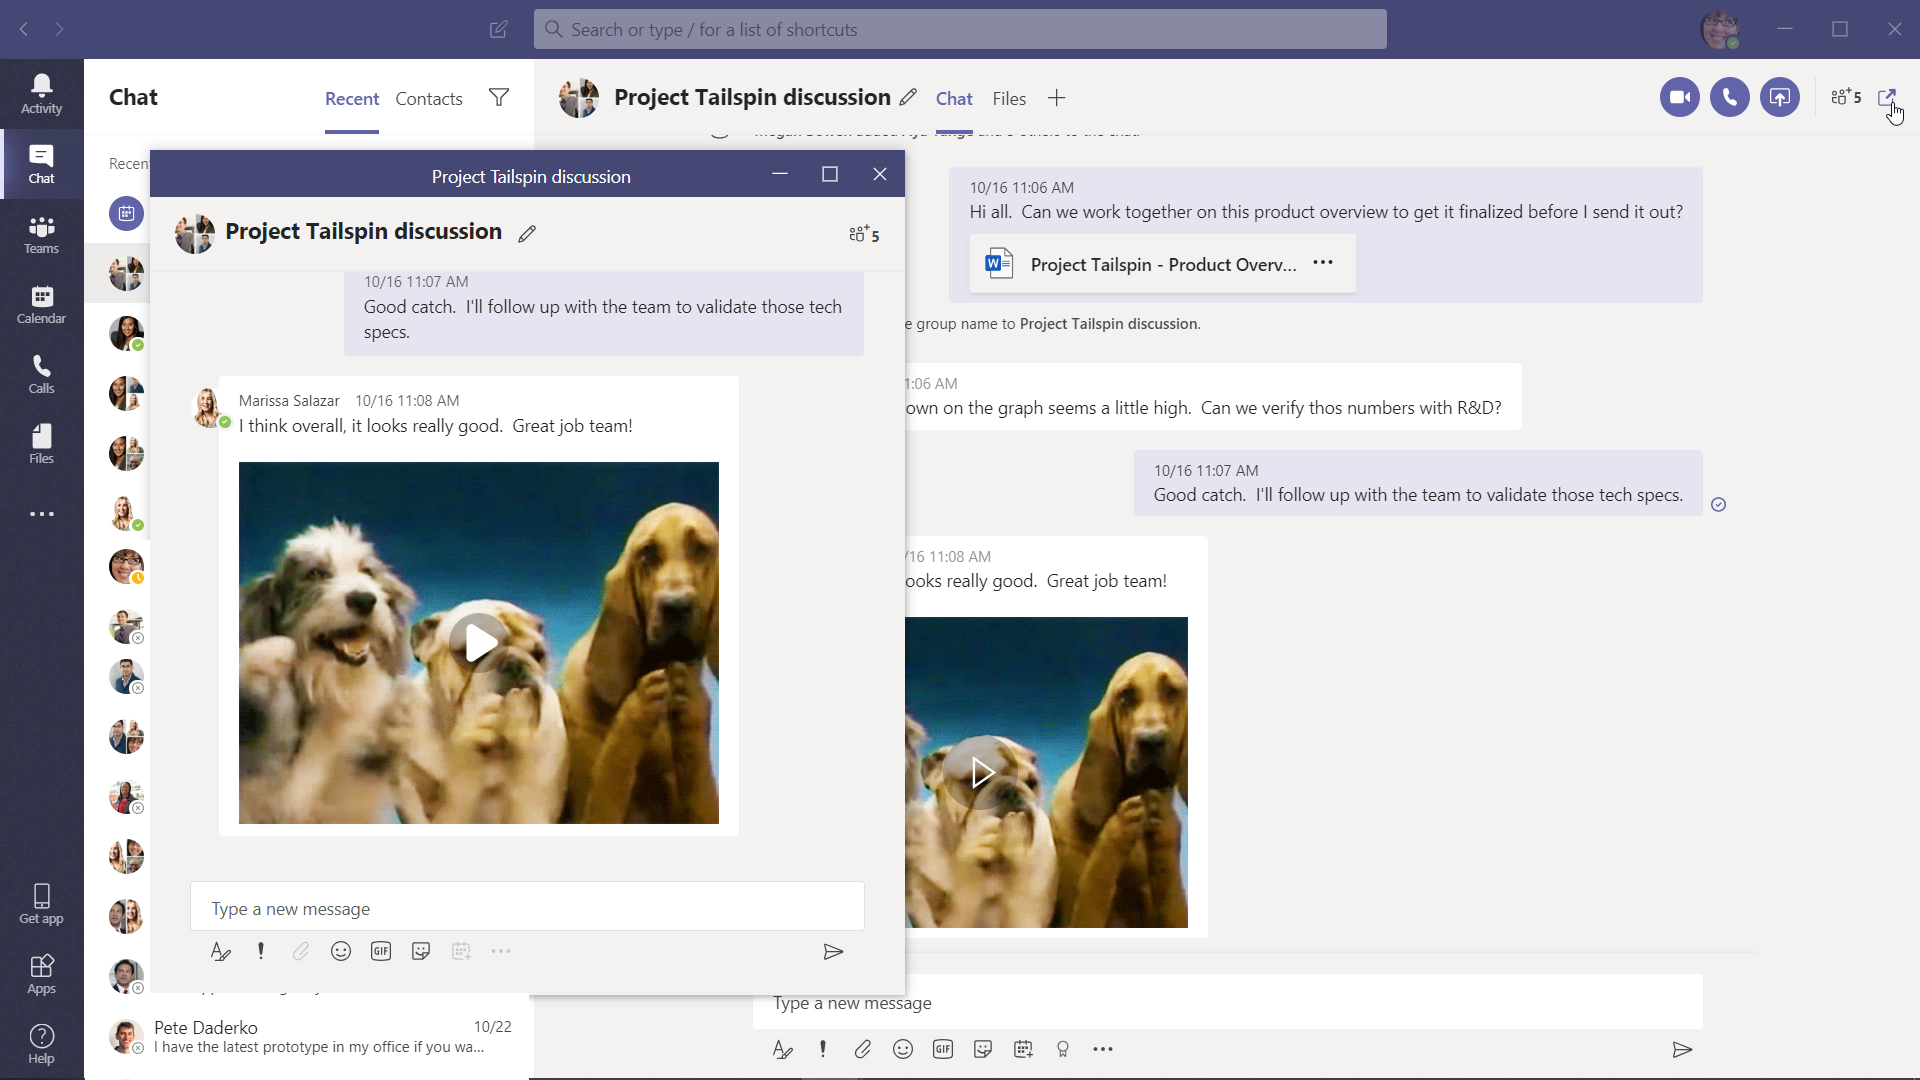 Microsoft Teams is adding an option to move chats to a separate window.